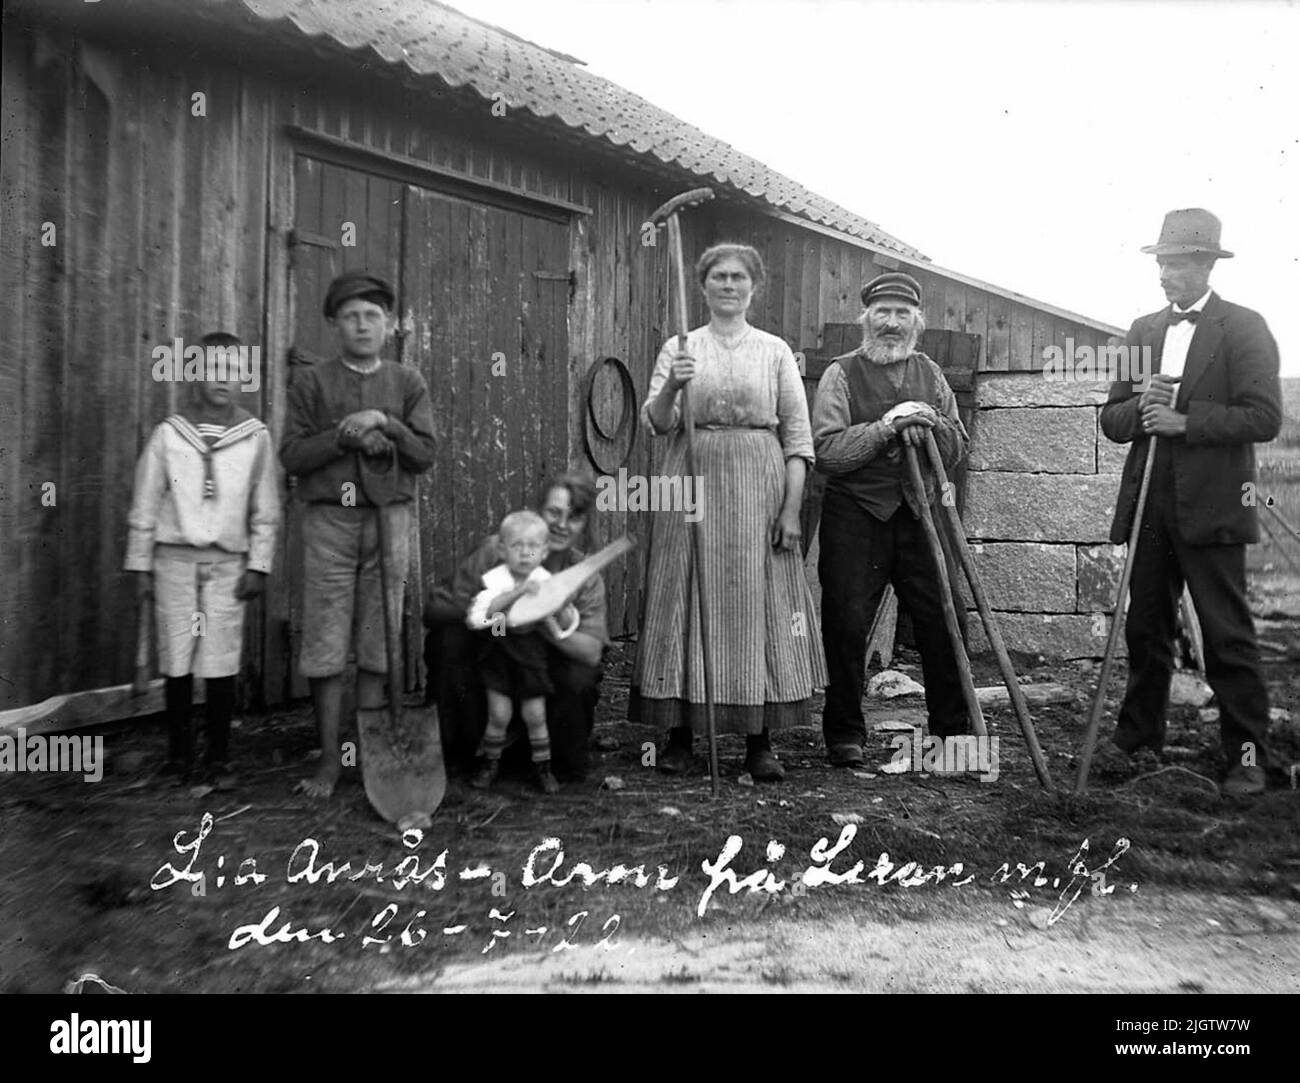 Written in the picture: '1st Anrås. Aron on the clay et al. 26/7 1922.' According to listing: 'L: a rås. Aron on the clay et al etc 26, 1922, Gerda - Herman Ahl, clay' . Stock Photo